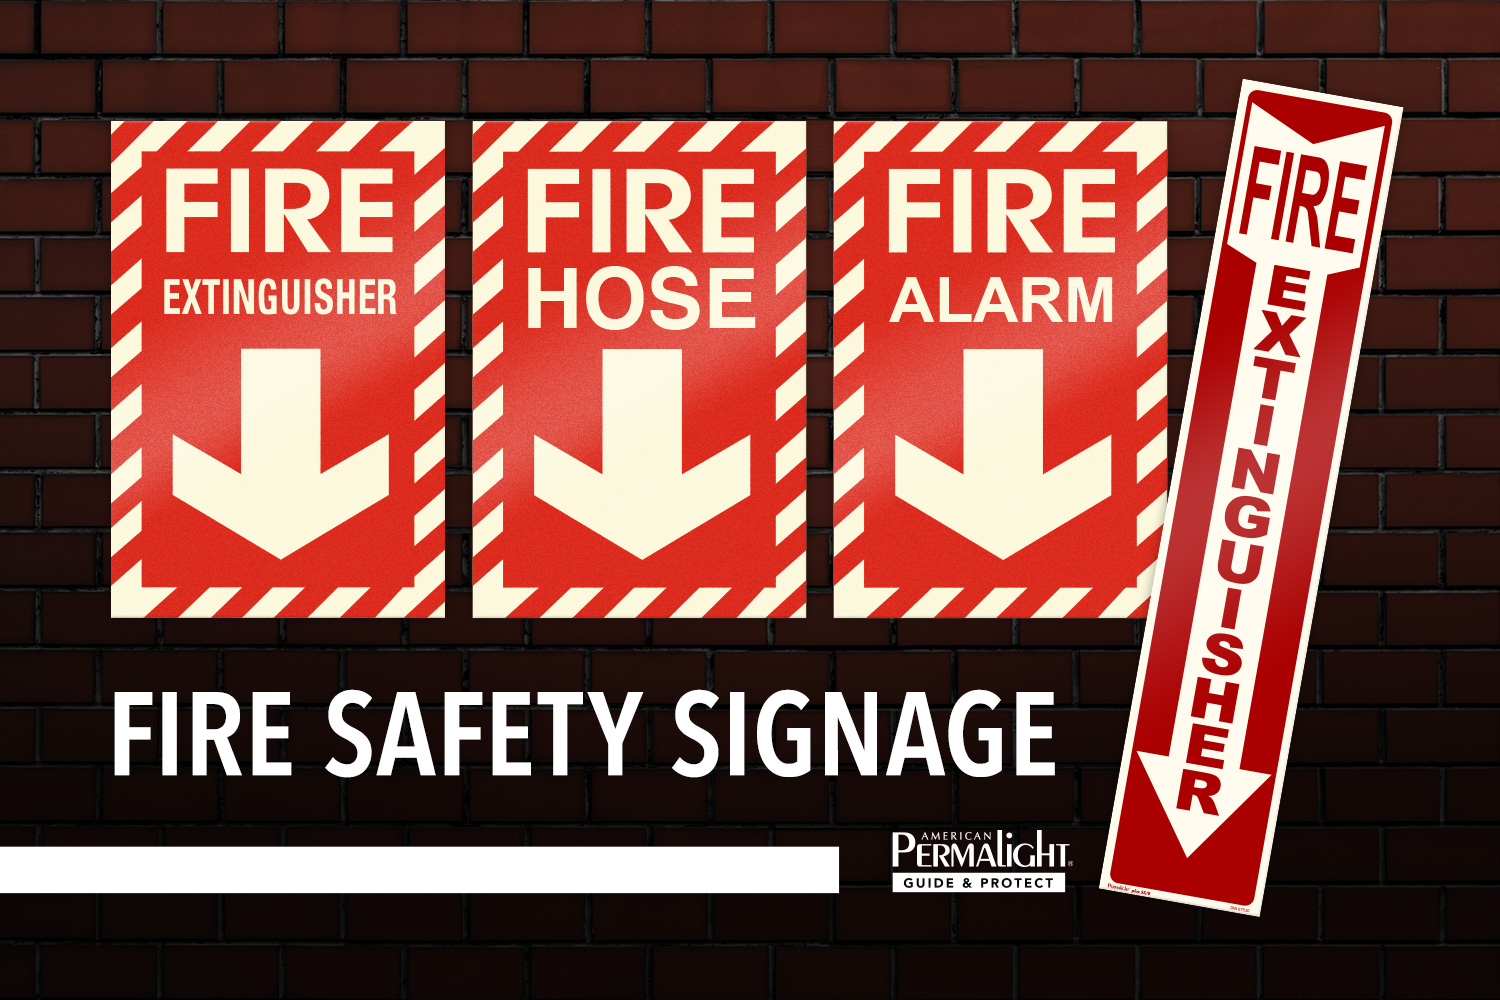 PERMALIGHT® Fire Safety Signage